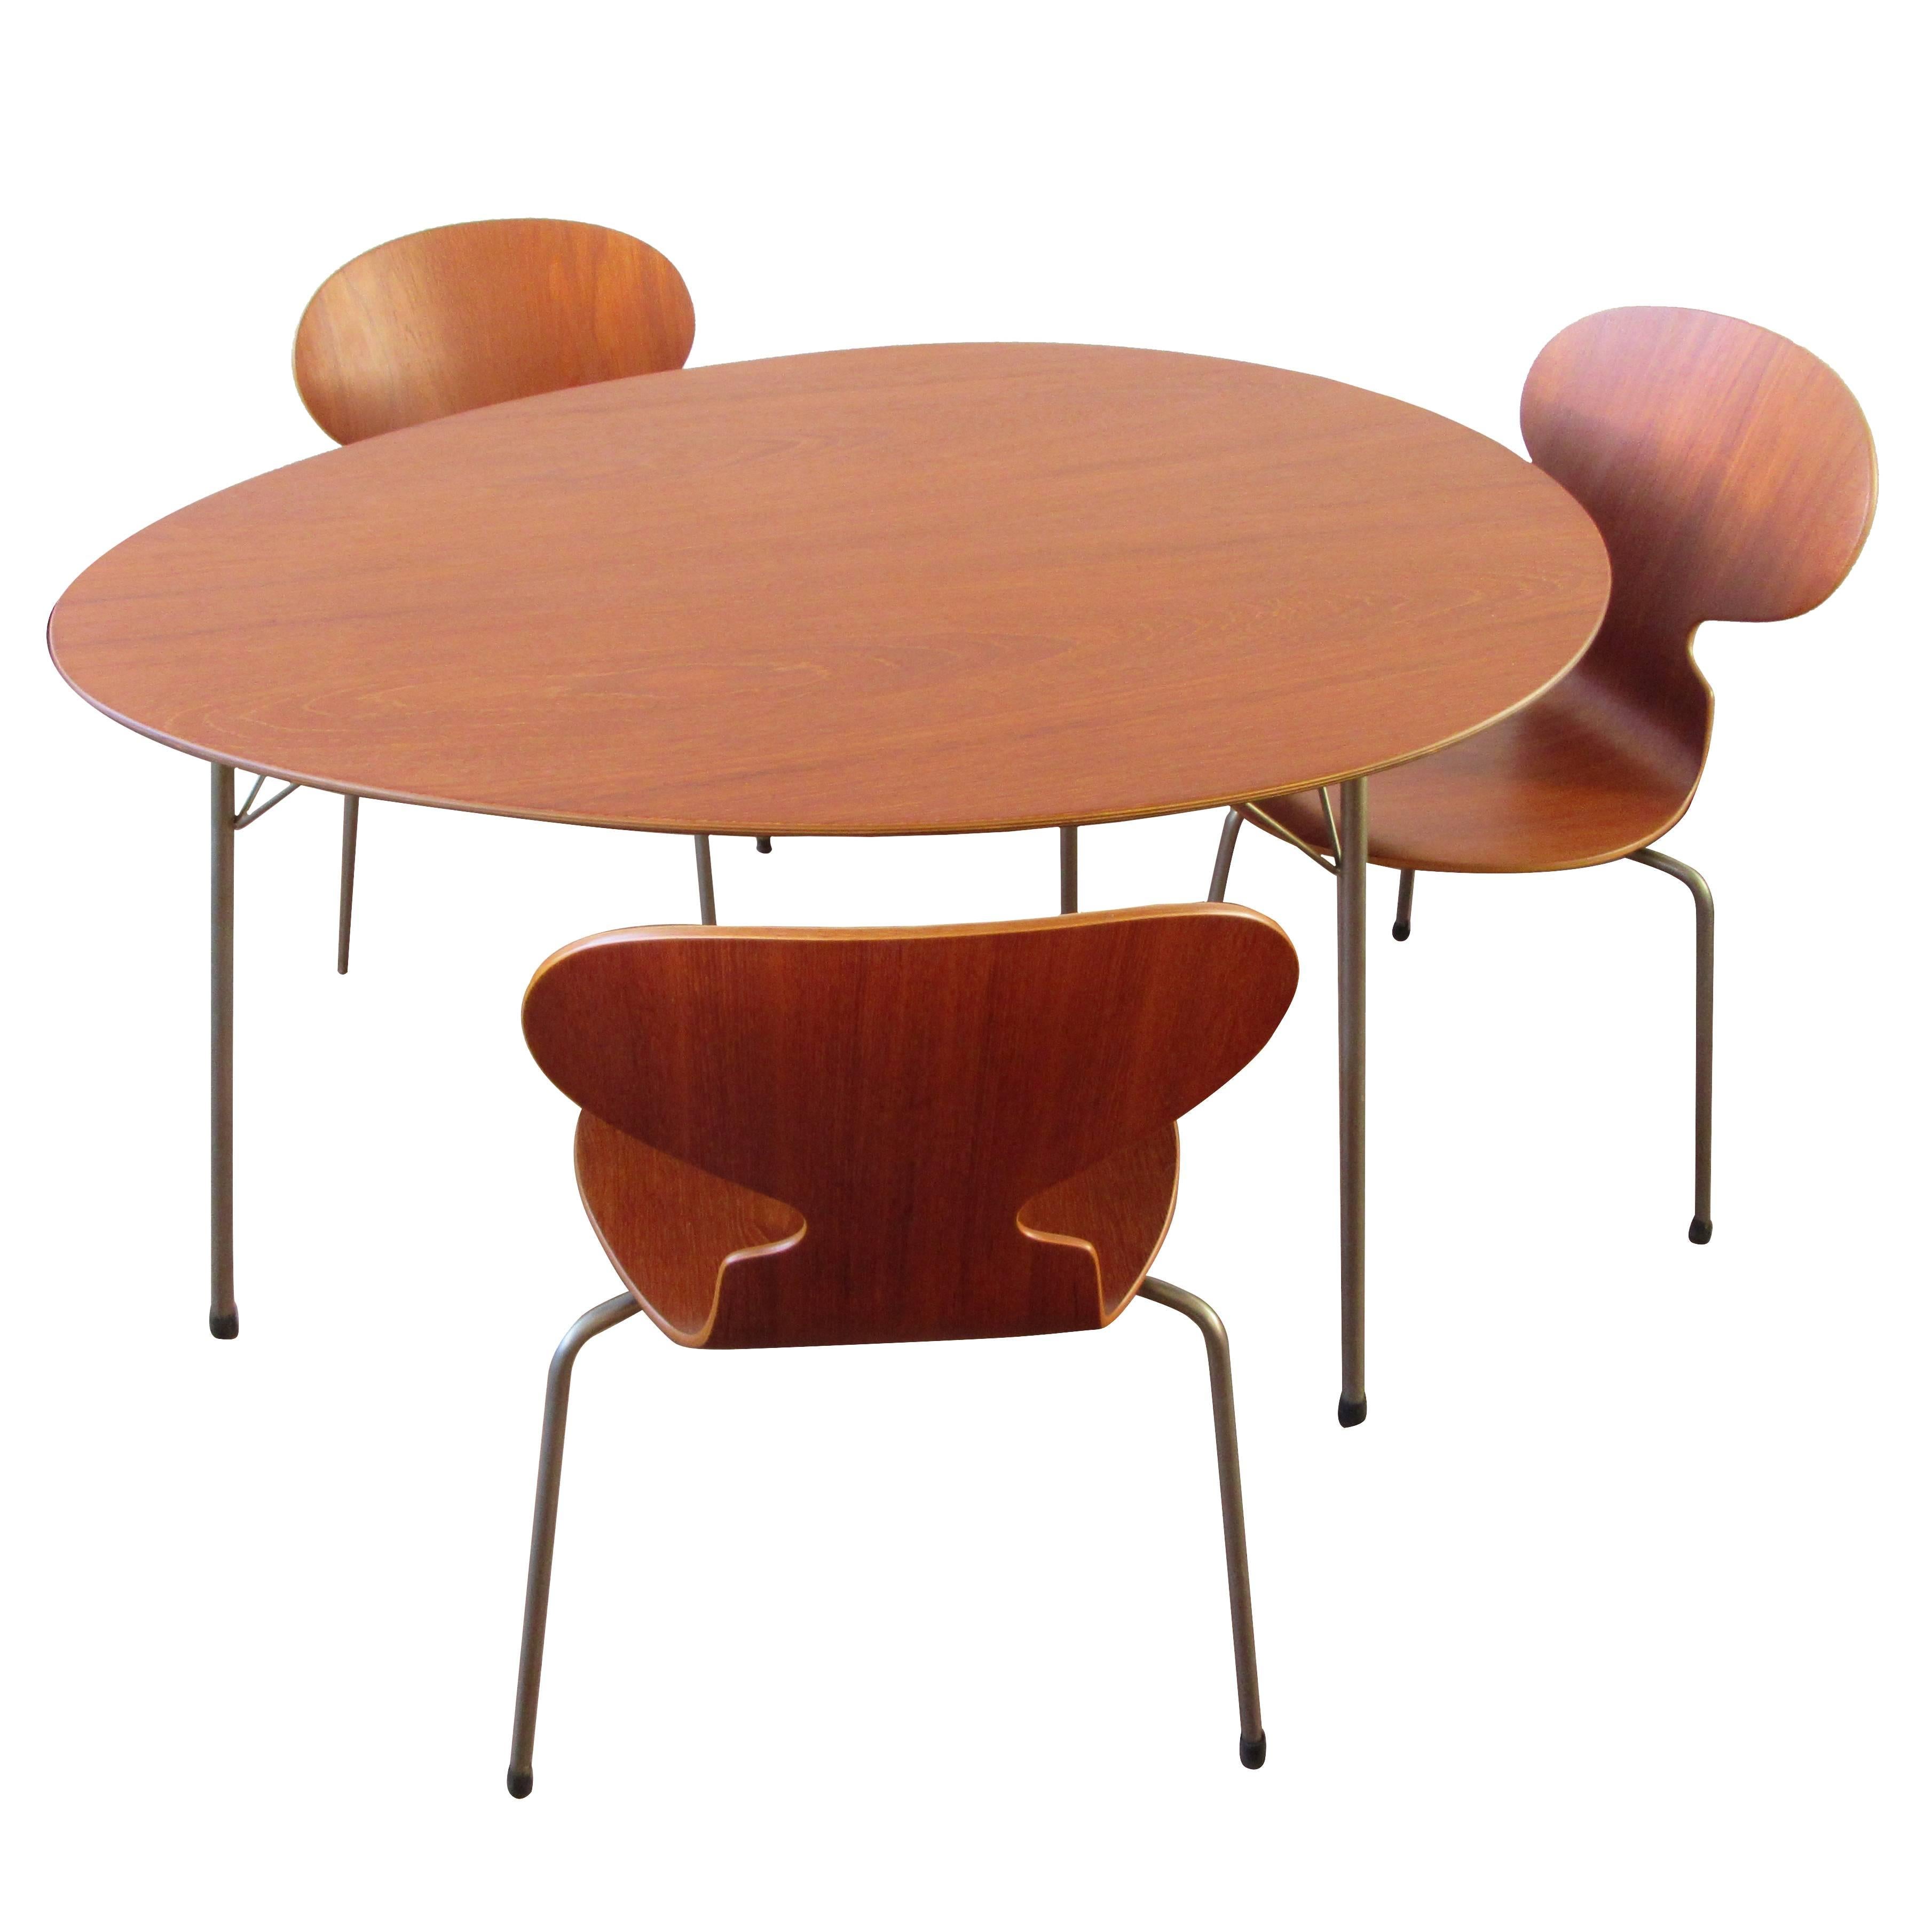 Pristine Three-Legged Ant Table Set in Teak with Three Chairs by Arne Jacobsen For Sale